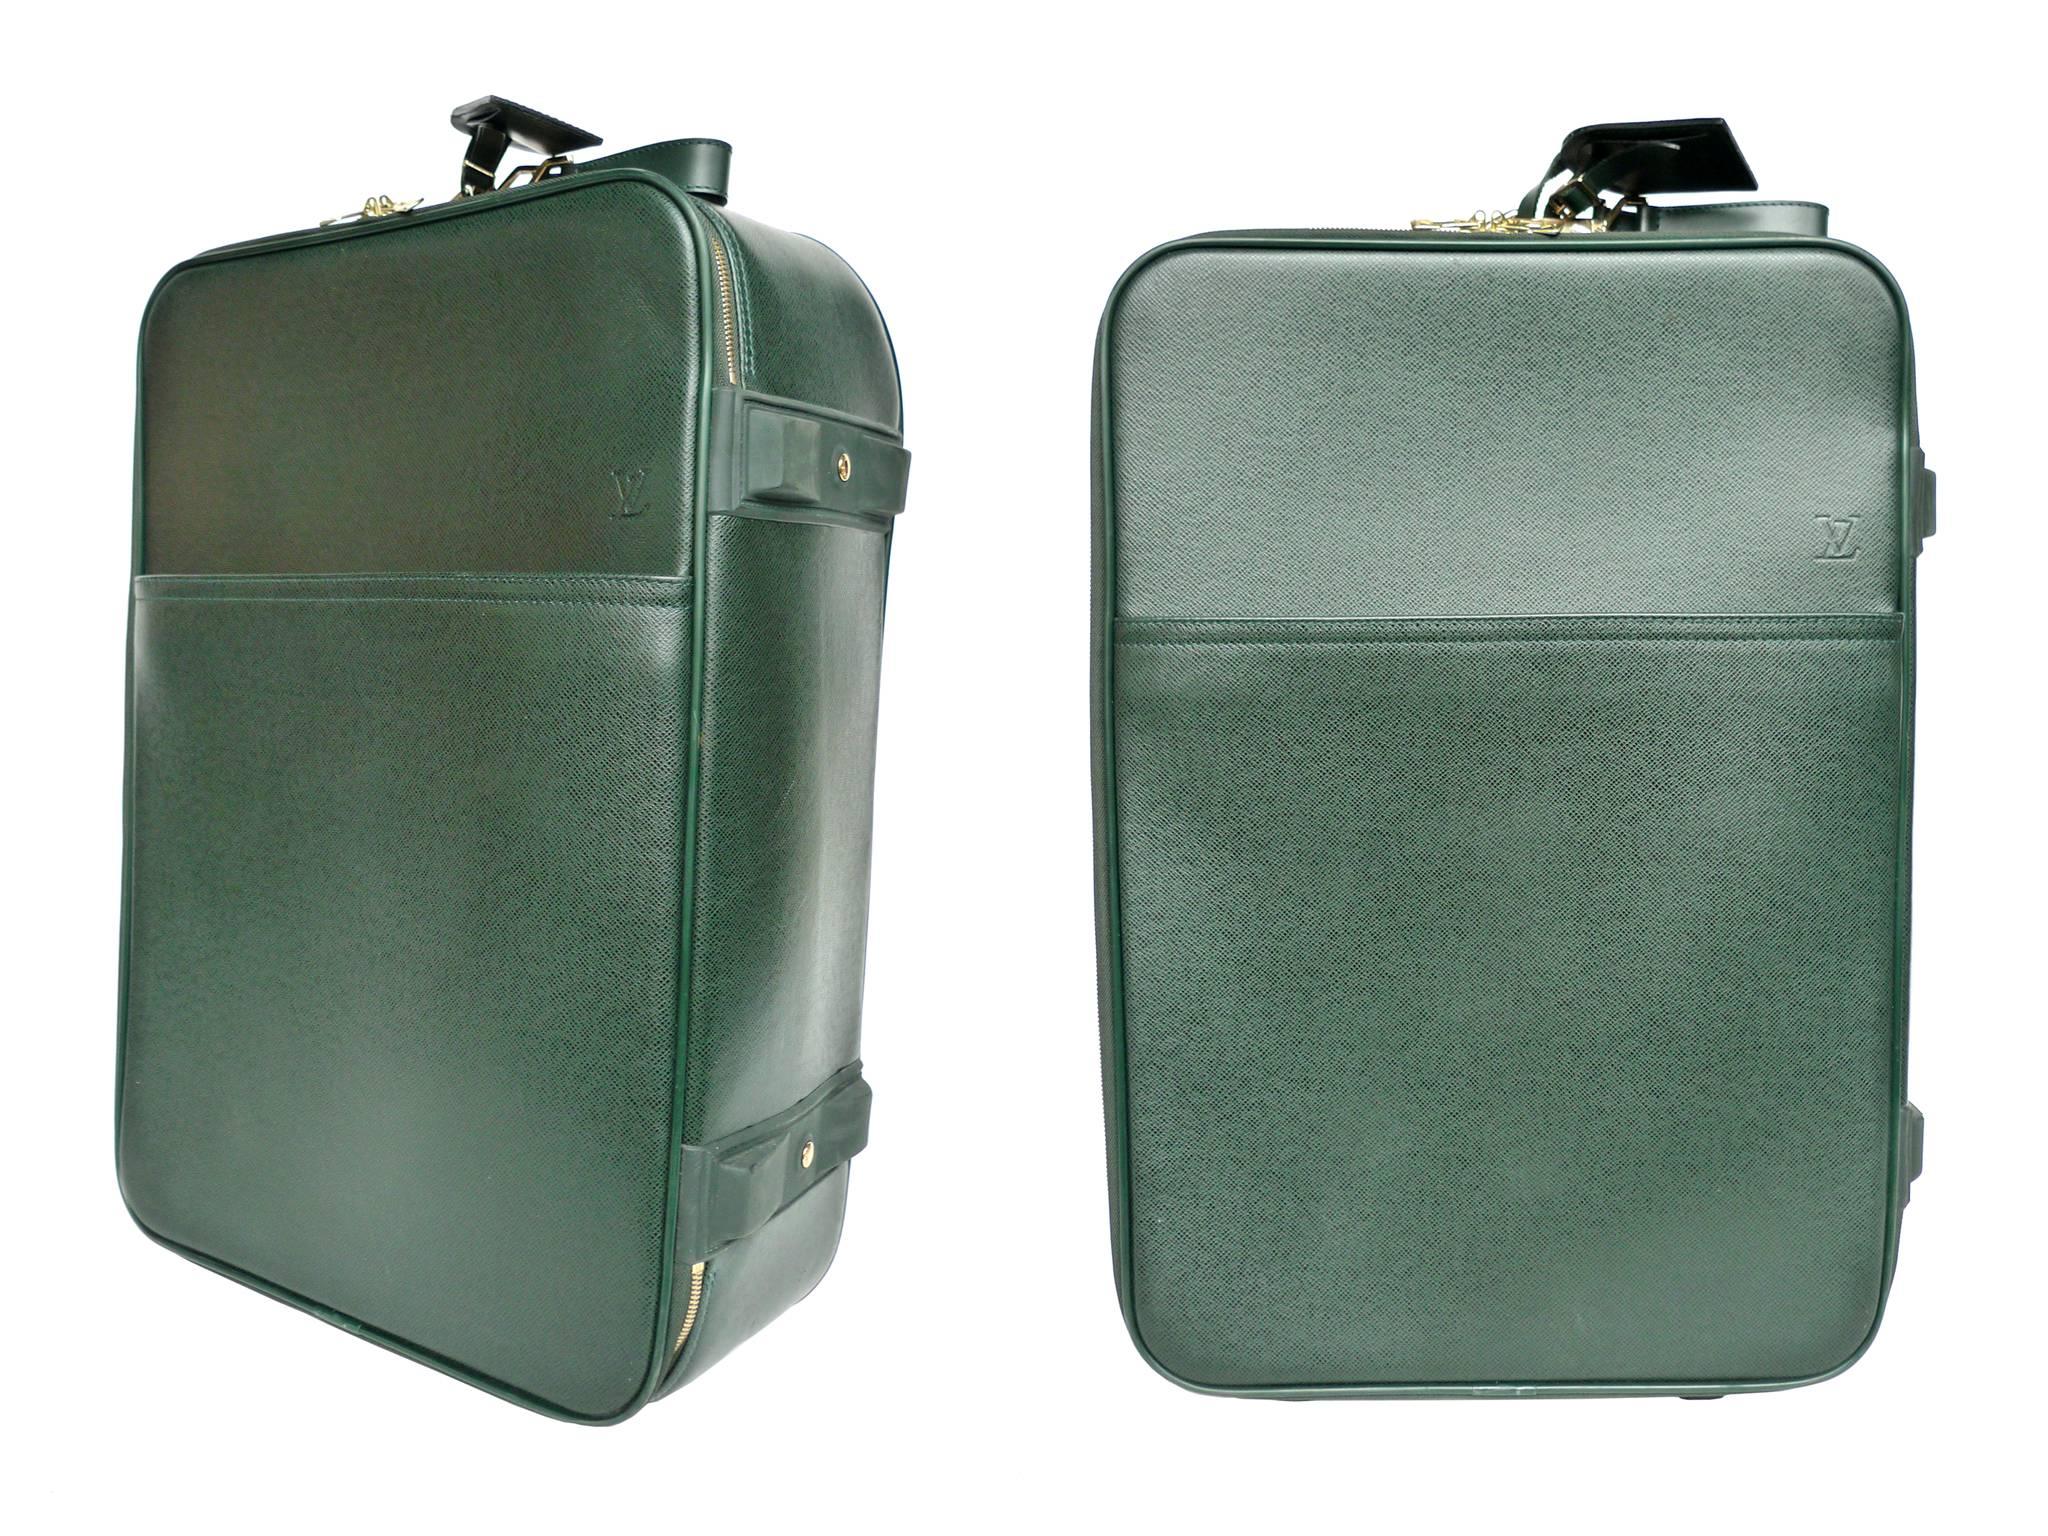 Pégase 55 is a small, compact Louis Vuitton travel suitcase. It is crafted from durable, soft Taiga leather in a rich hunter green color. Gold-hued zippers beautifully outline the sleek shape. The suitcase's functional features include: An exterior